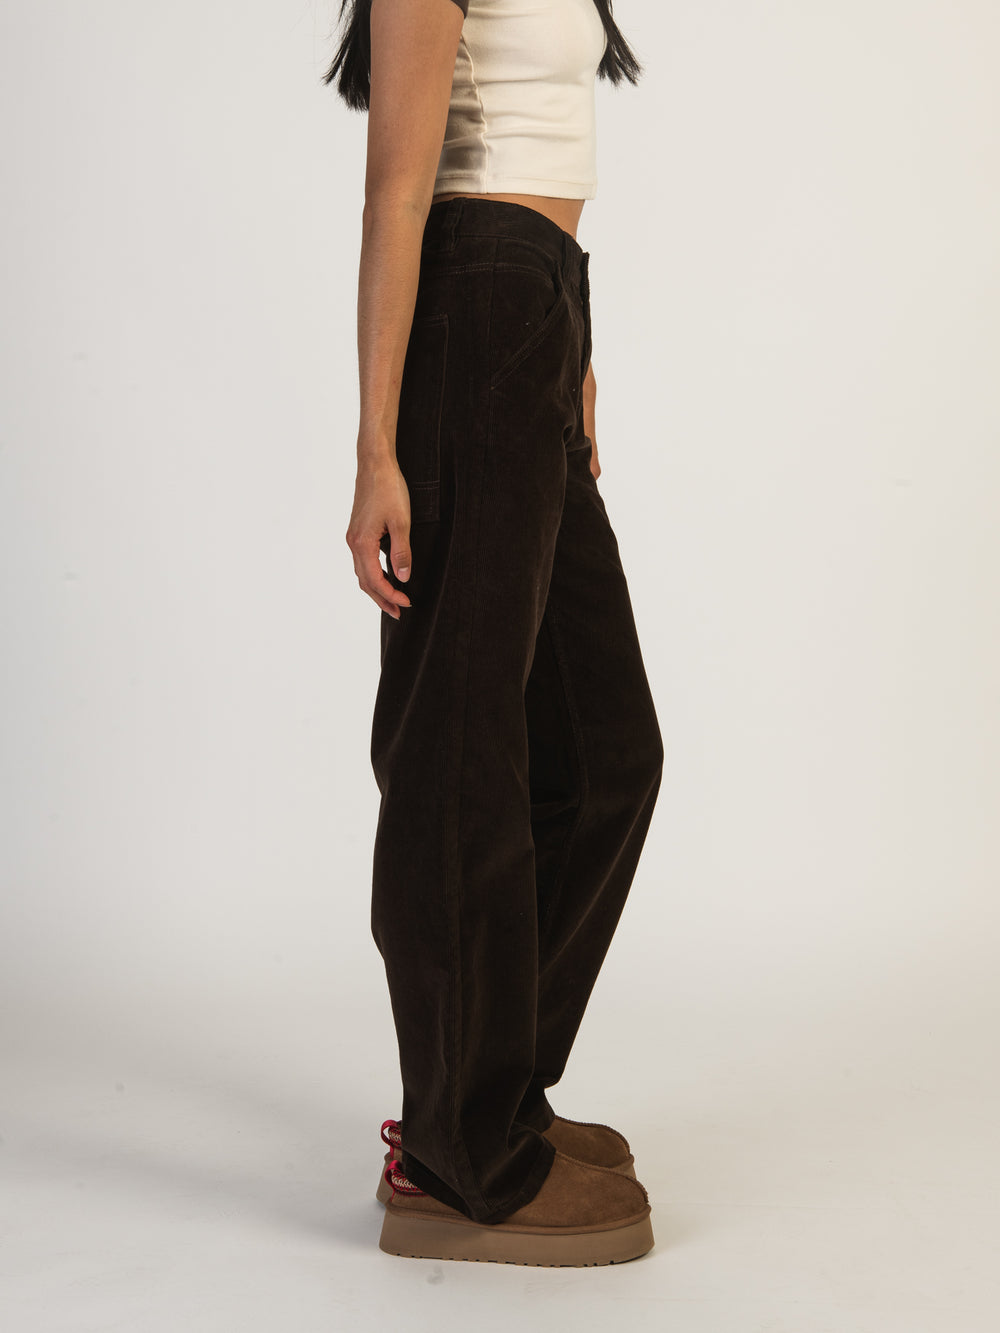 HARLOW LOW RISE CARGO PANT - CHOCOLATE